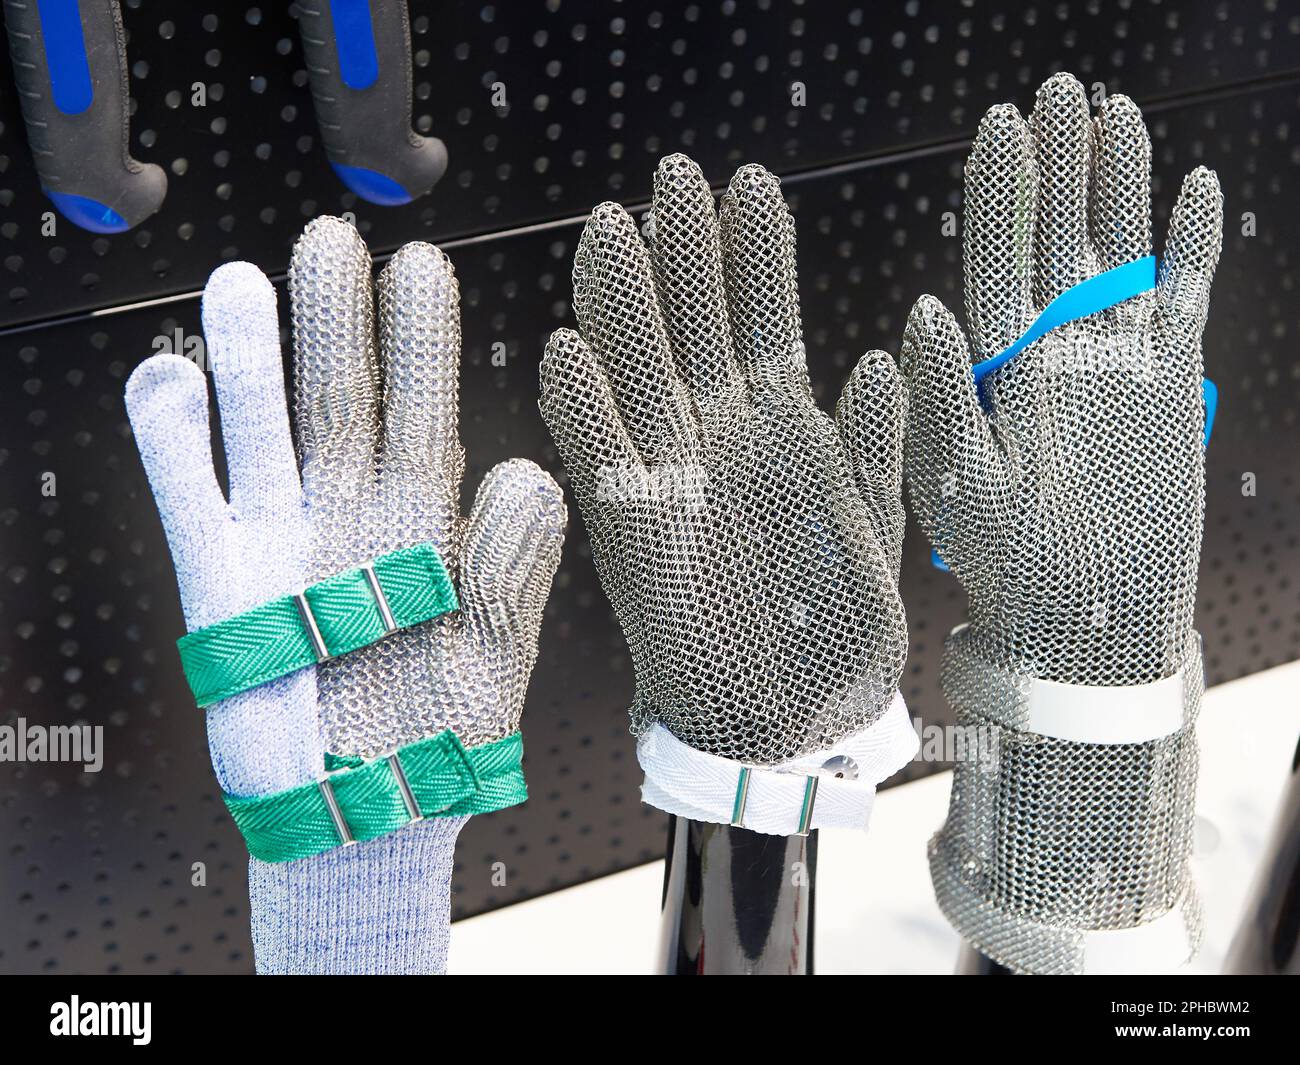 https://c8.alamy.com/comp/2PHBWM2/metal-chainmail-gloves-for-work-food-meat-in-store-2PHBWM2.jpg